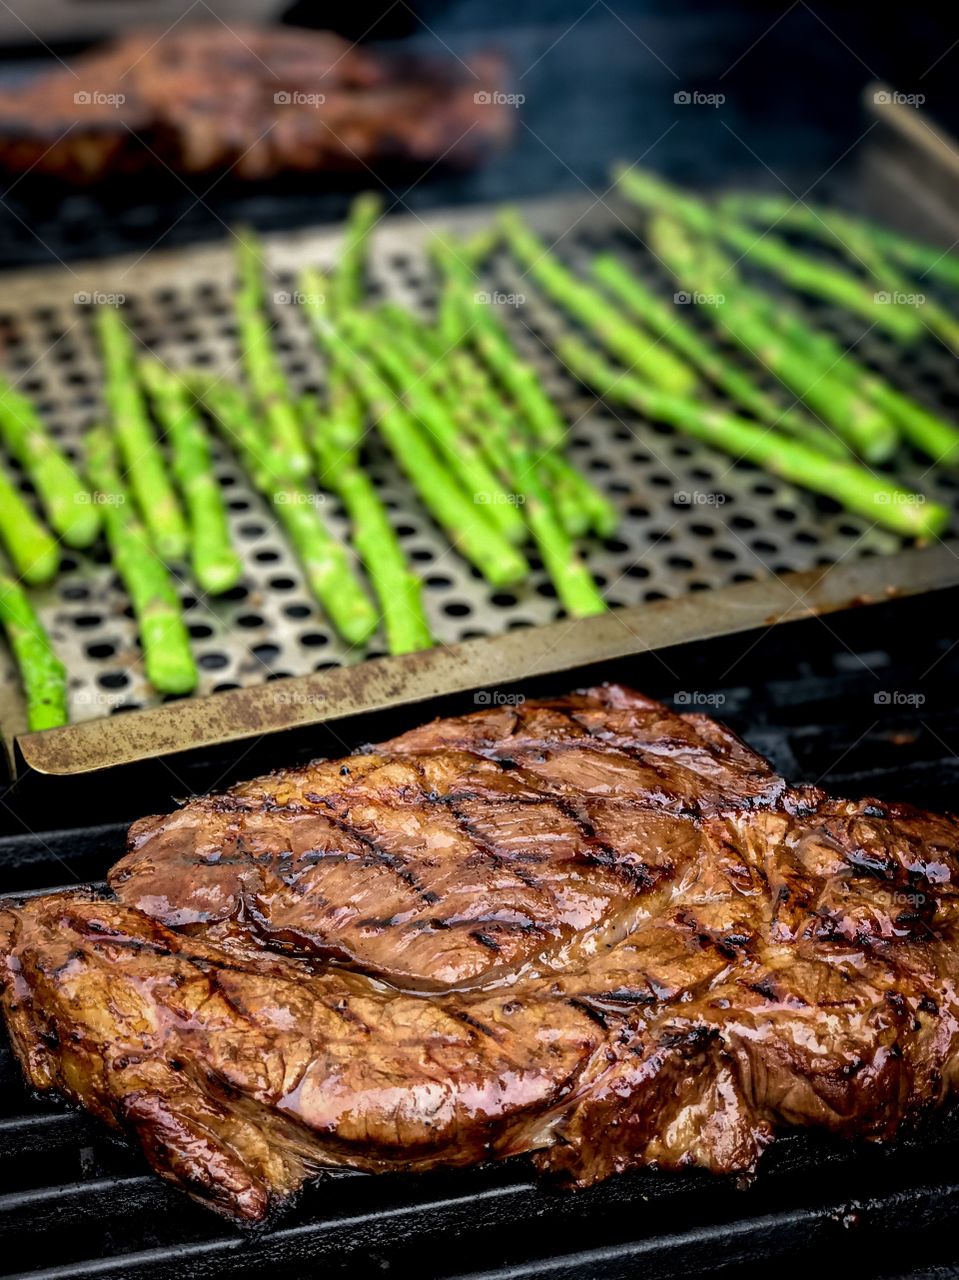 Steaks and veggies on a grill.